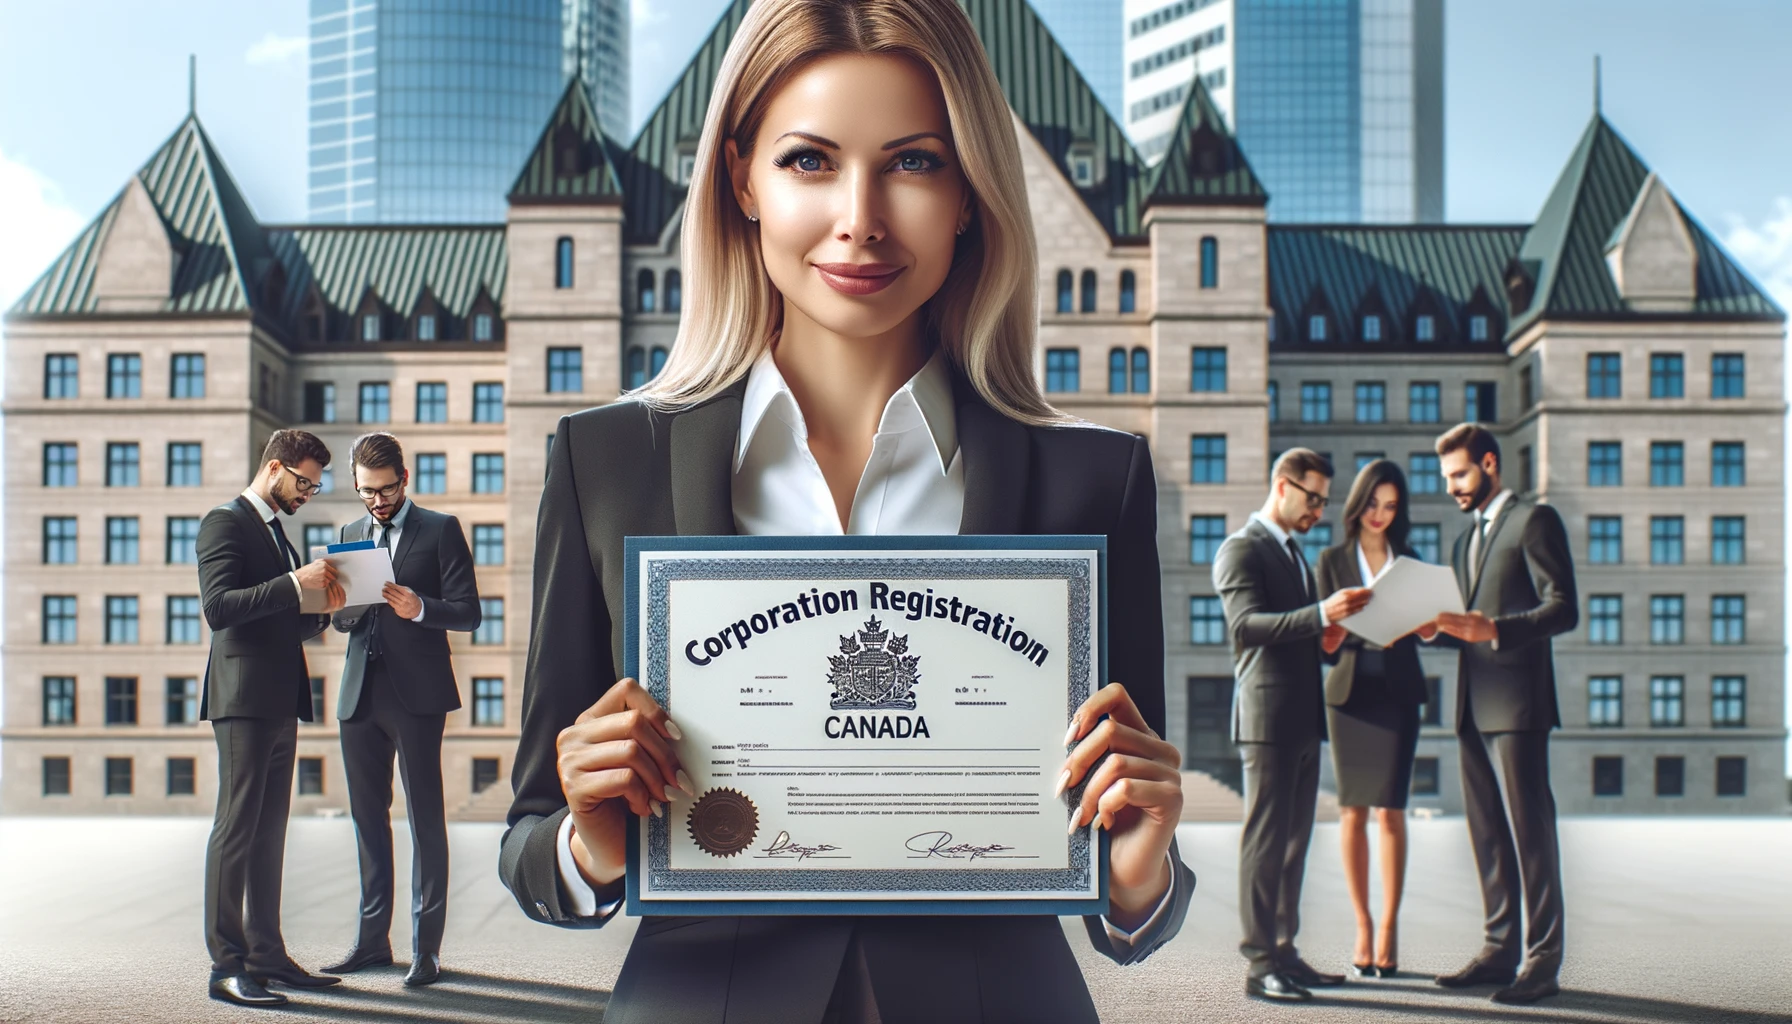 Canadian businesswoman holding a corporate registration certificate, standing in front of a government building with crowd in background.